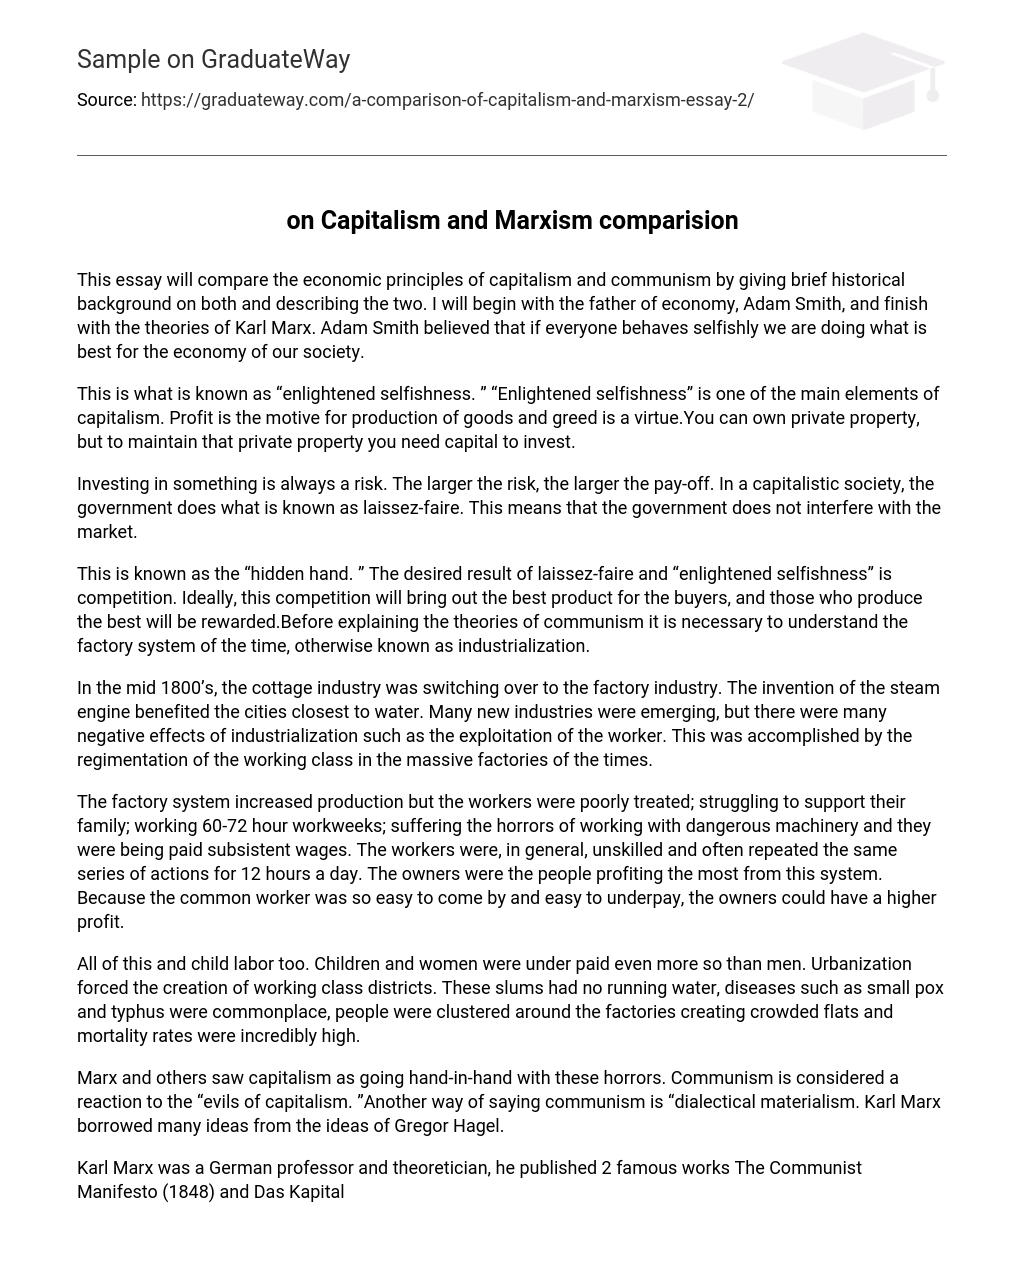 on Capitalism and Marxism comparision